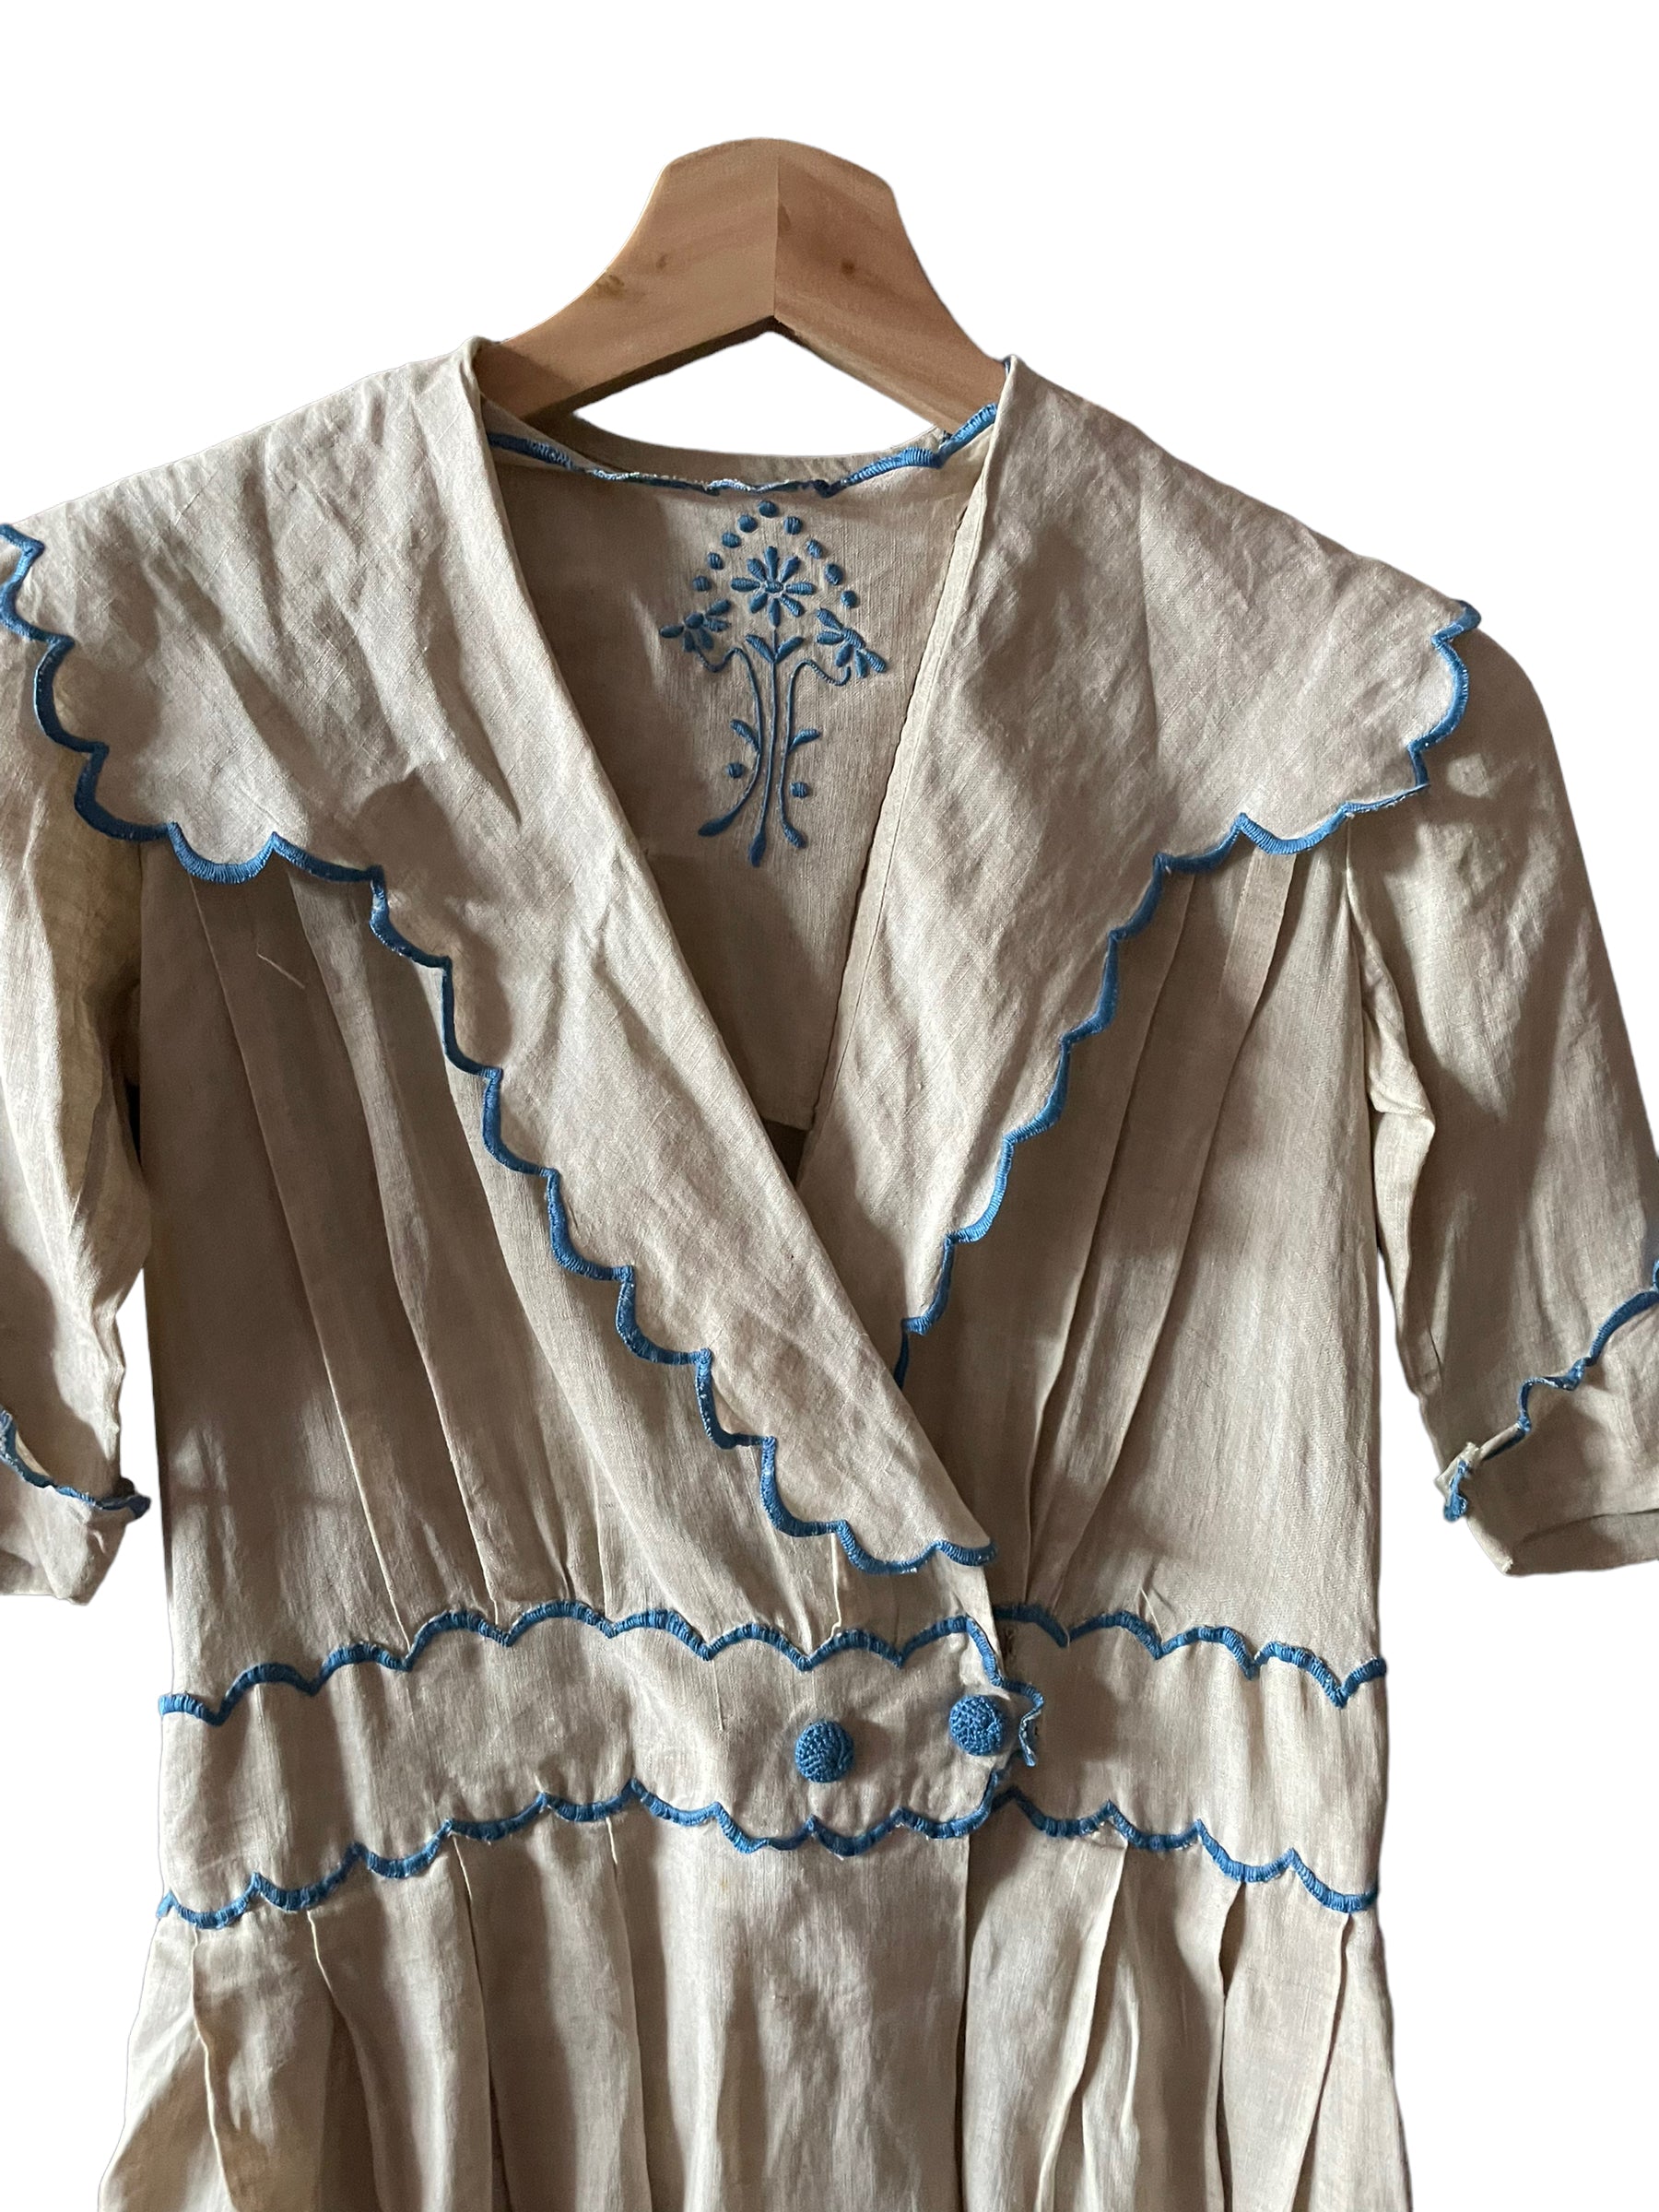 Front top view of Antique Early 1900s Linen Dress SZ XS